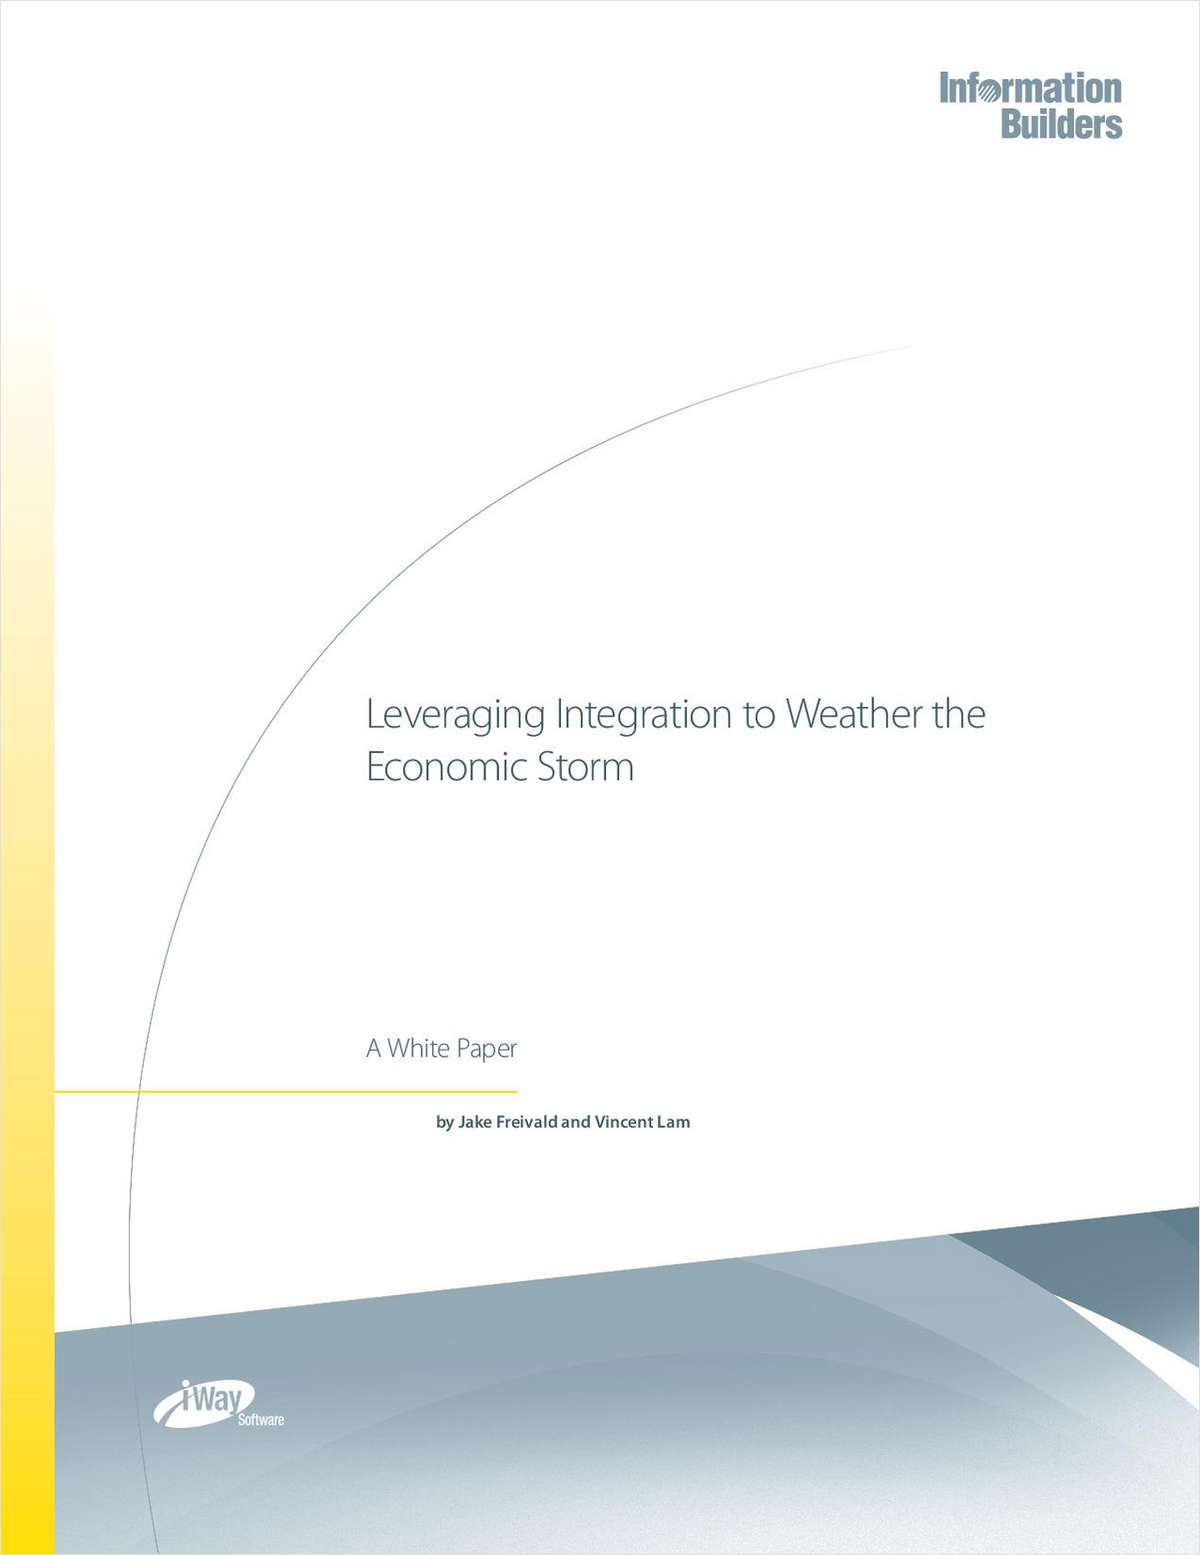 Leveraging Integration to Weather the Economic Storm